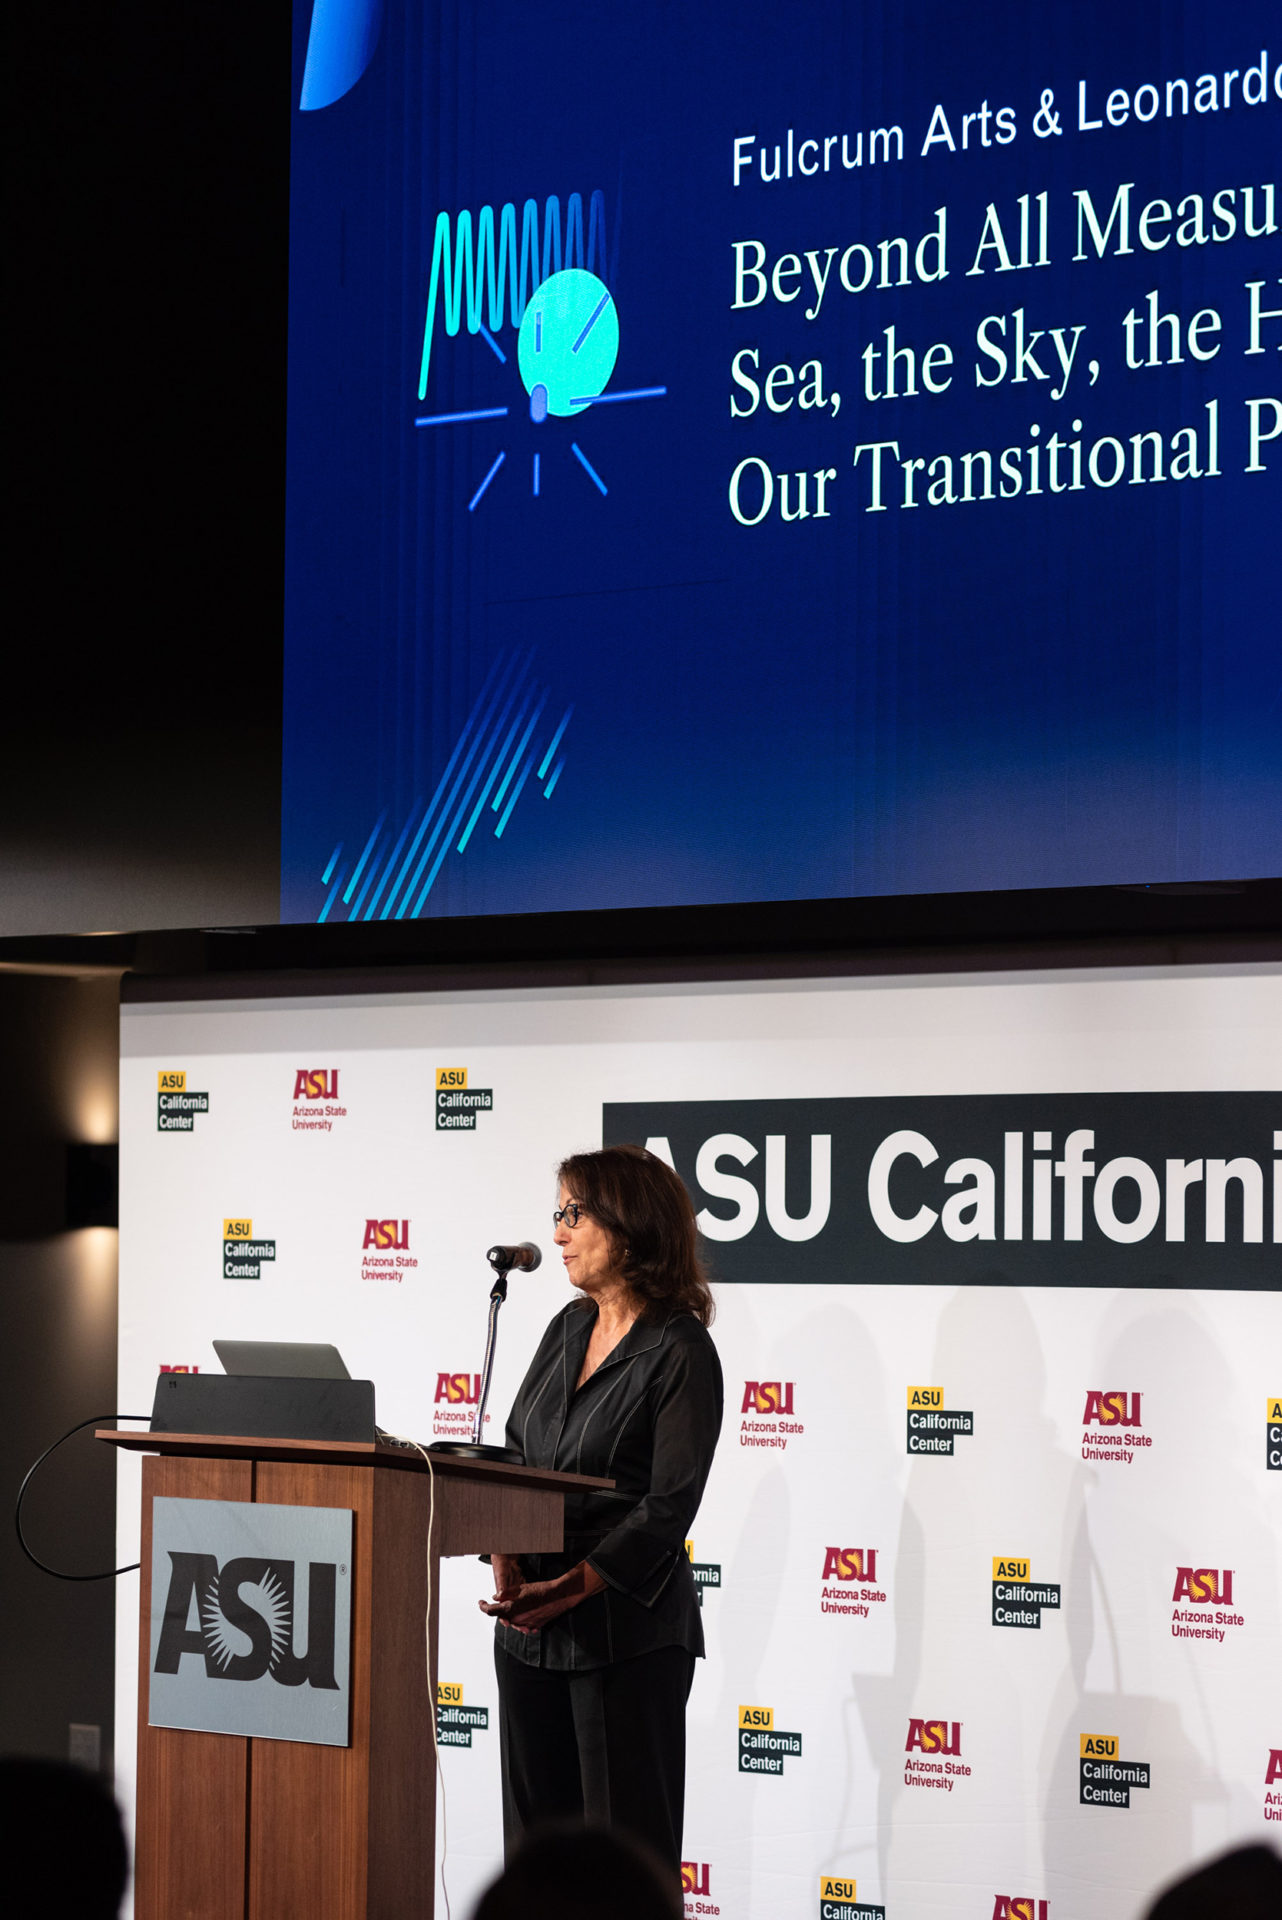 Opening remarks by Joan Weinstein, Director, Getty Foundation. Photo by Christopher Wormald, courtesy of Fulcrum Arts